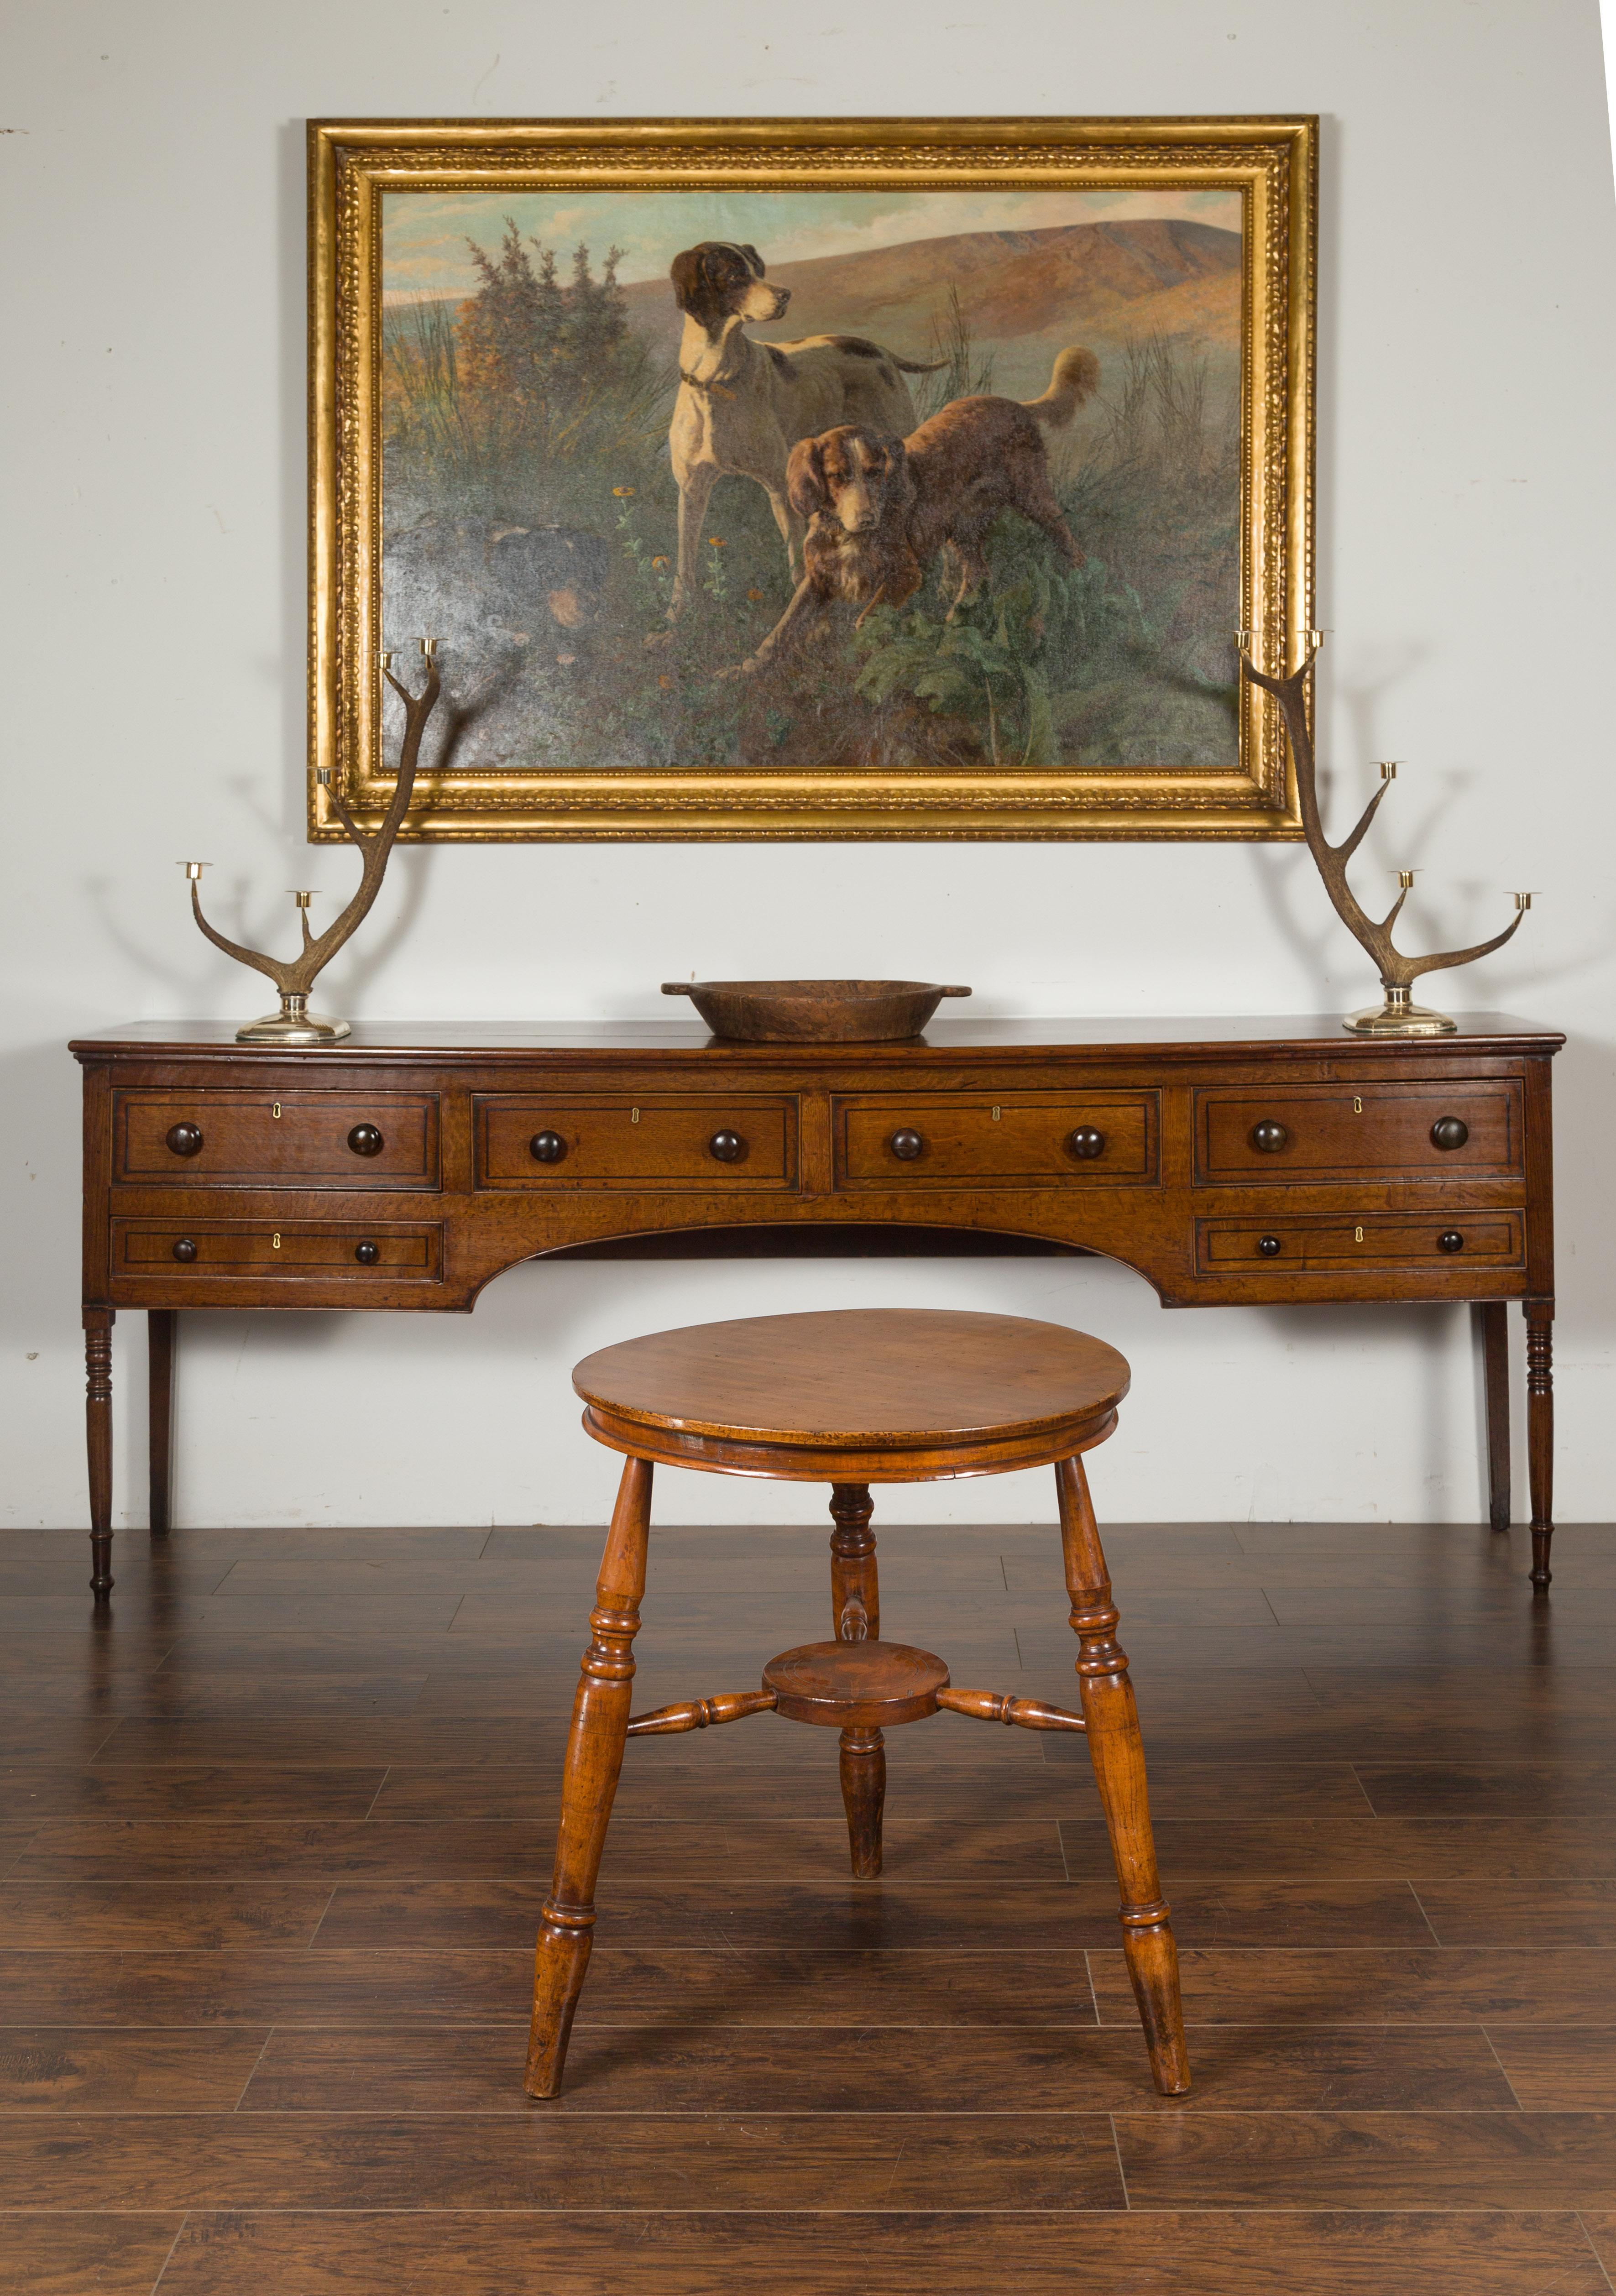 An unusual English cricket table from the mid-19th century, with circular sycamore top and cross-stretcher. Born in England during the third quarter of the 19th century, this cricket table features a round sycamore top, sitting above three turned